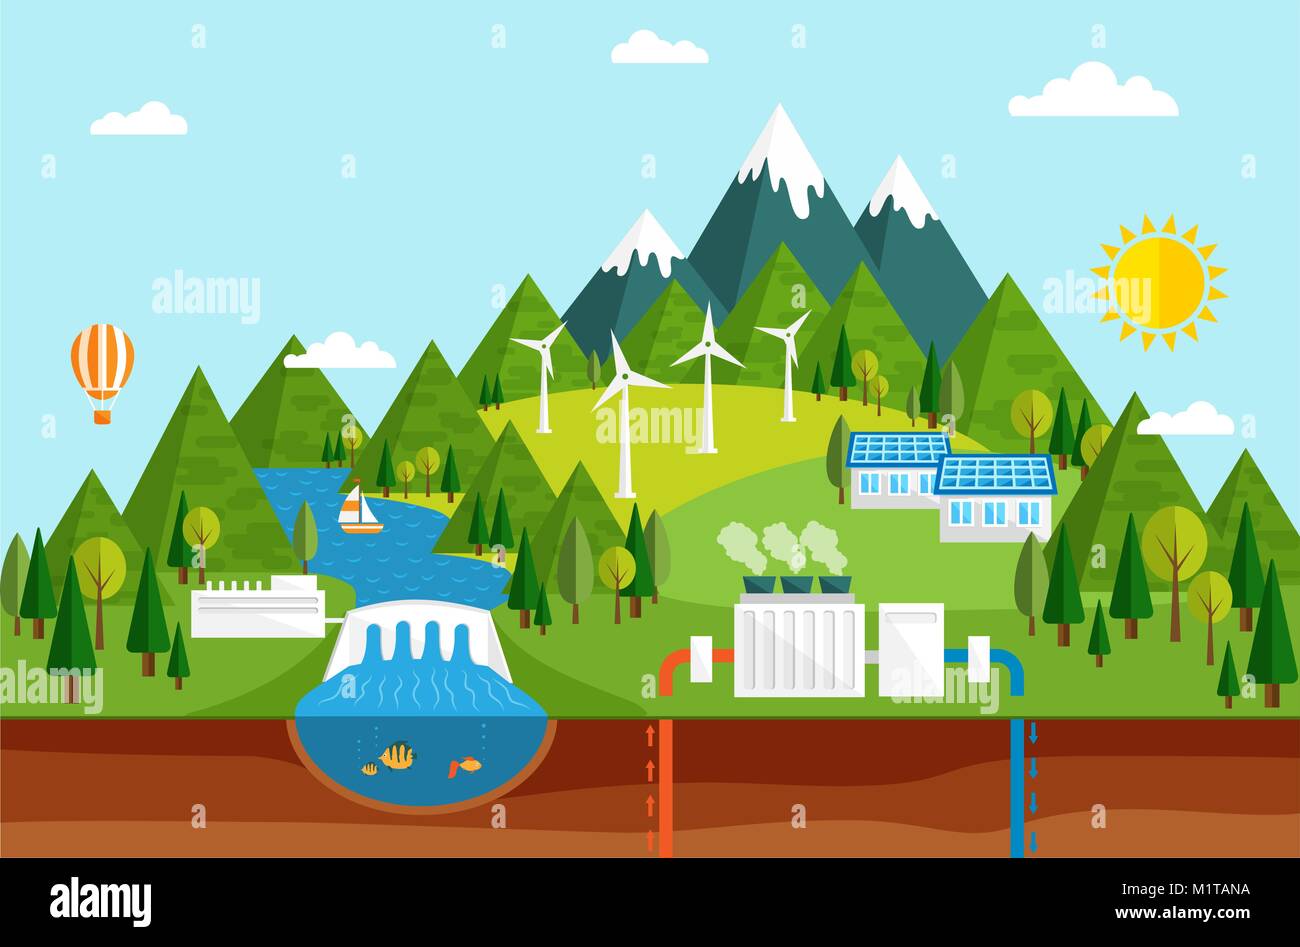 Renewable energy like hydro, solar, geothermal and wind power generation facilities Stock Vector